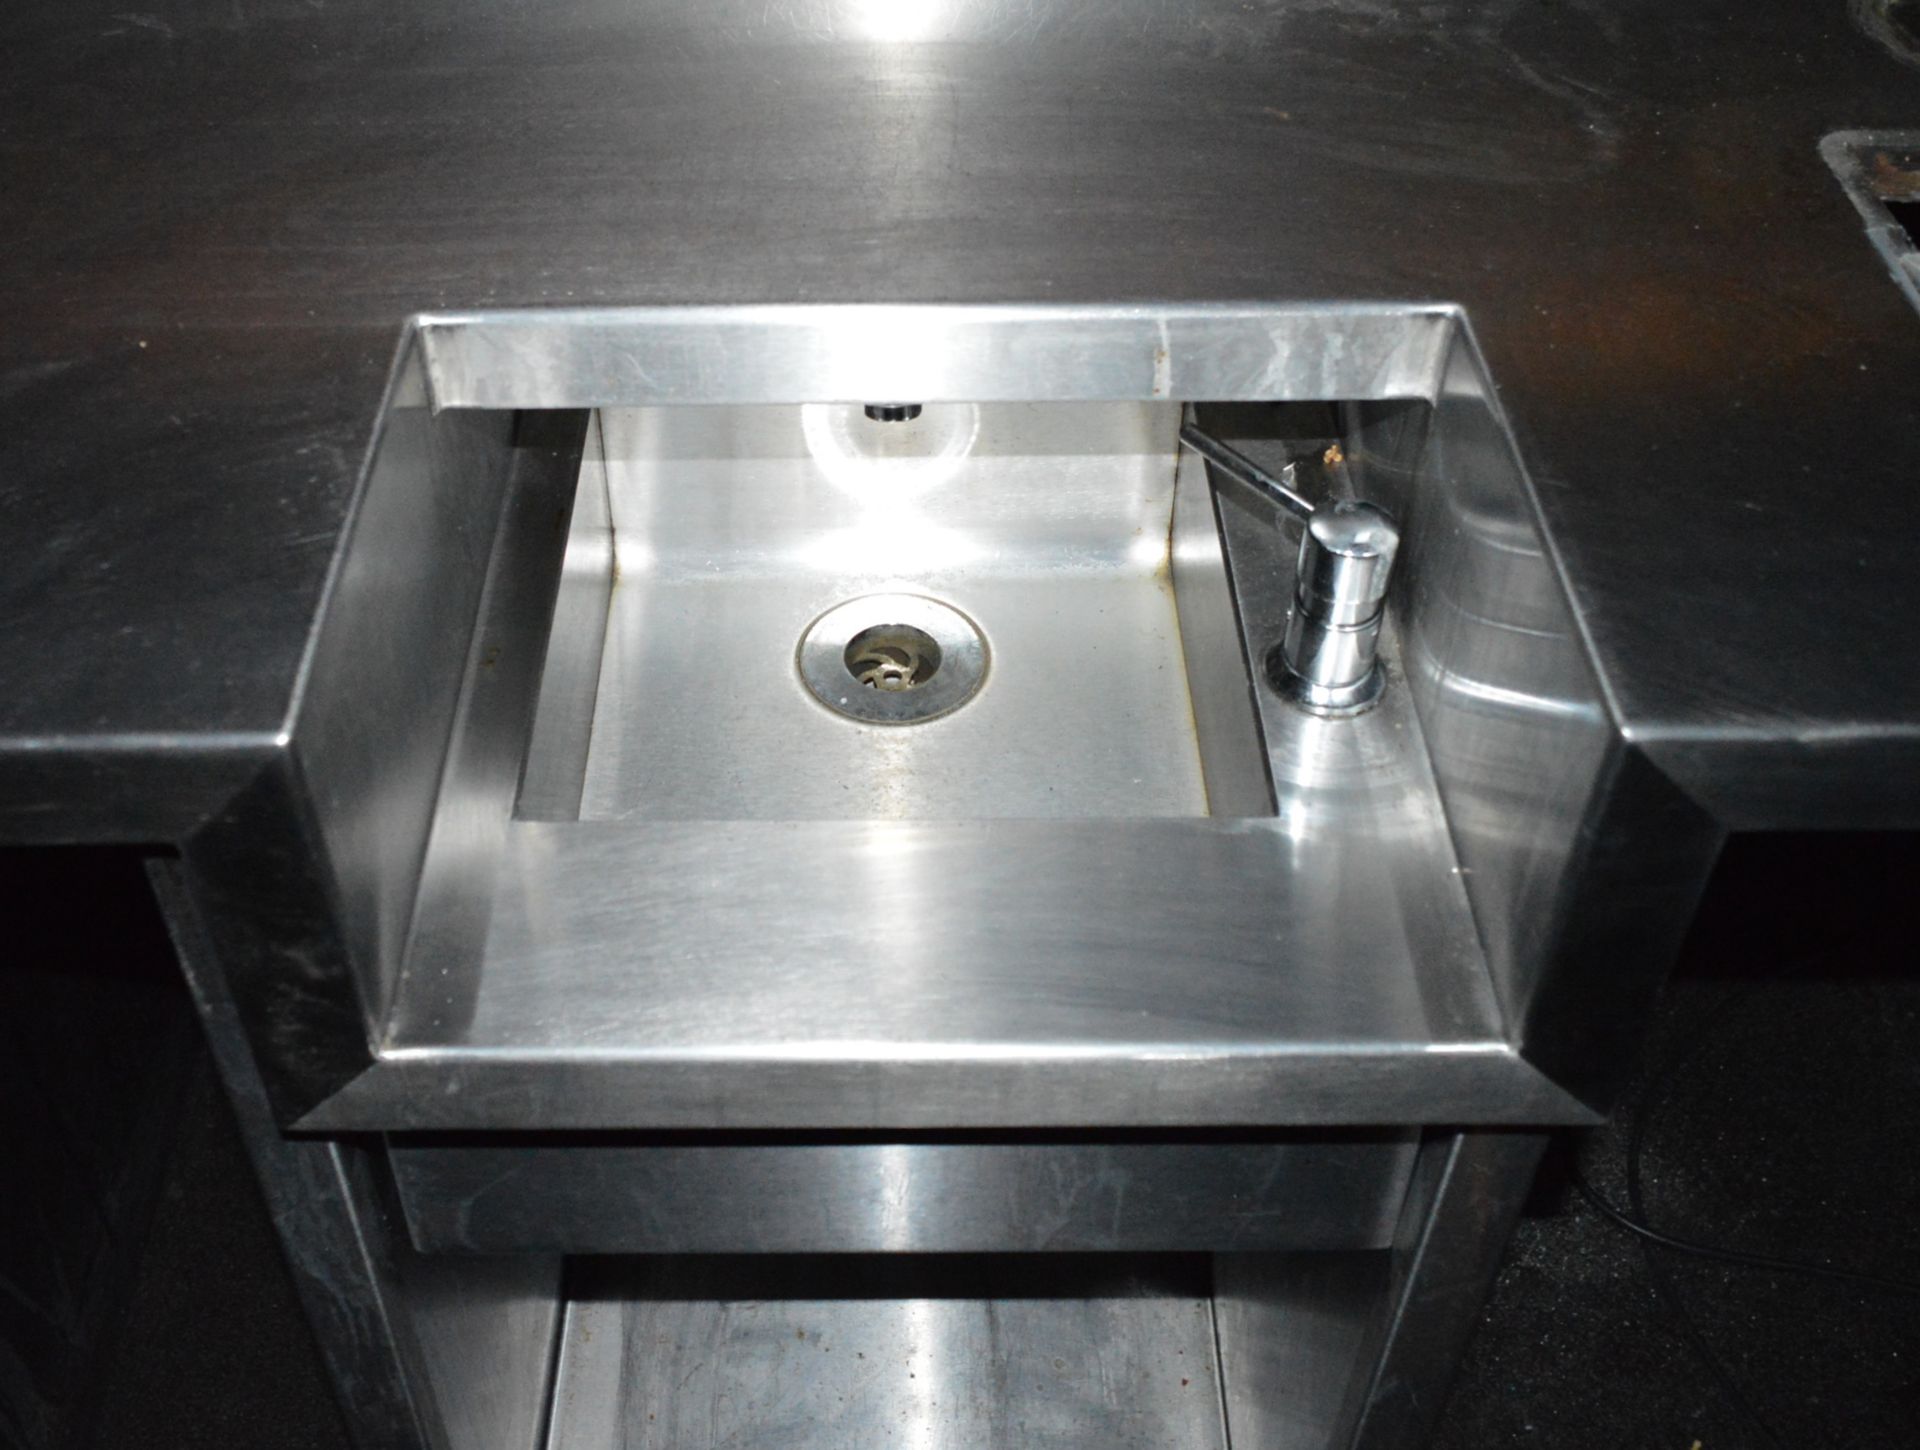 1 x Stainless Steel Bar Server Unit With Wash Basins - More Info to Follow - CL350 - Ref In2-060 - - Image 9 of 11